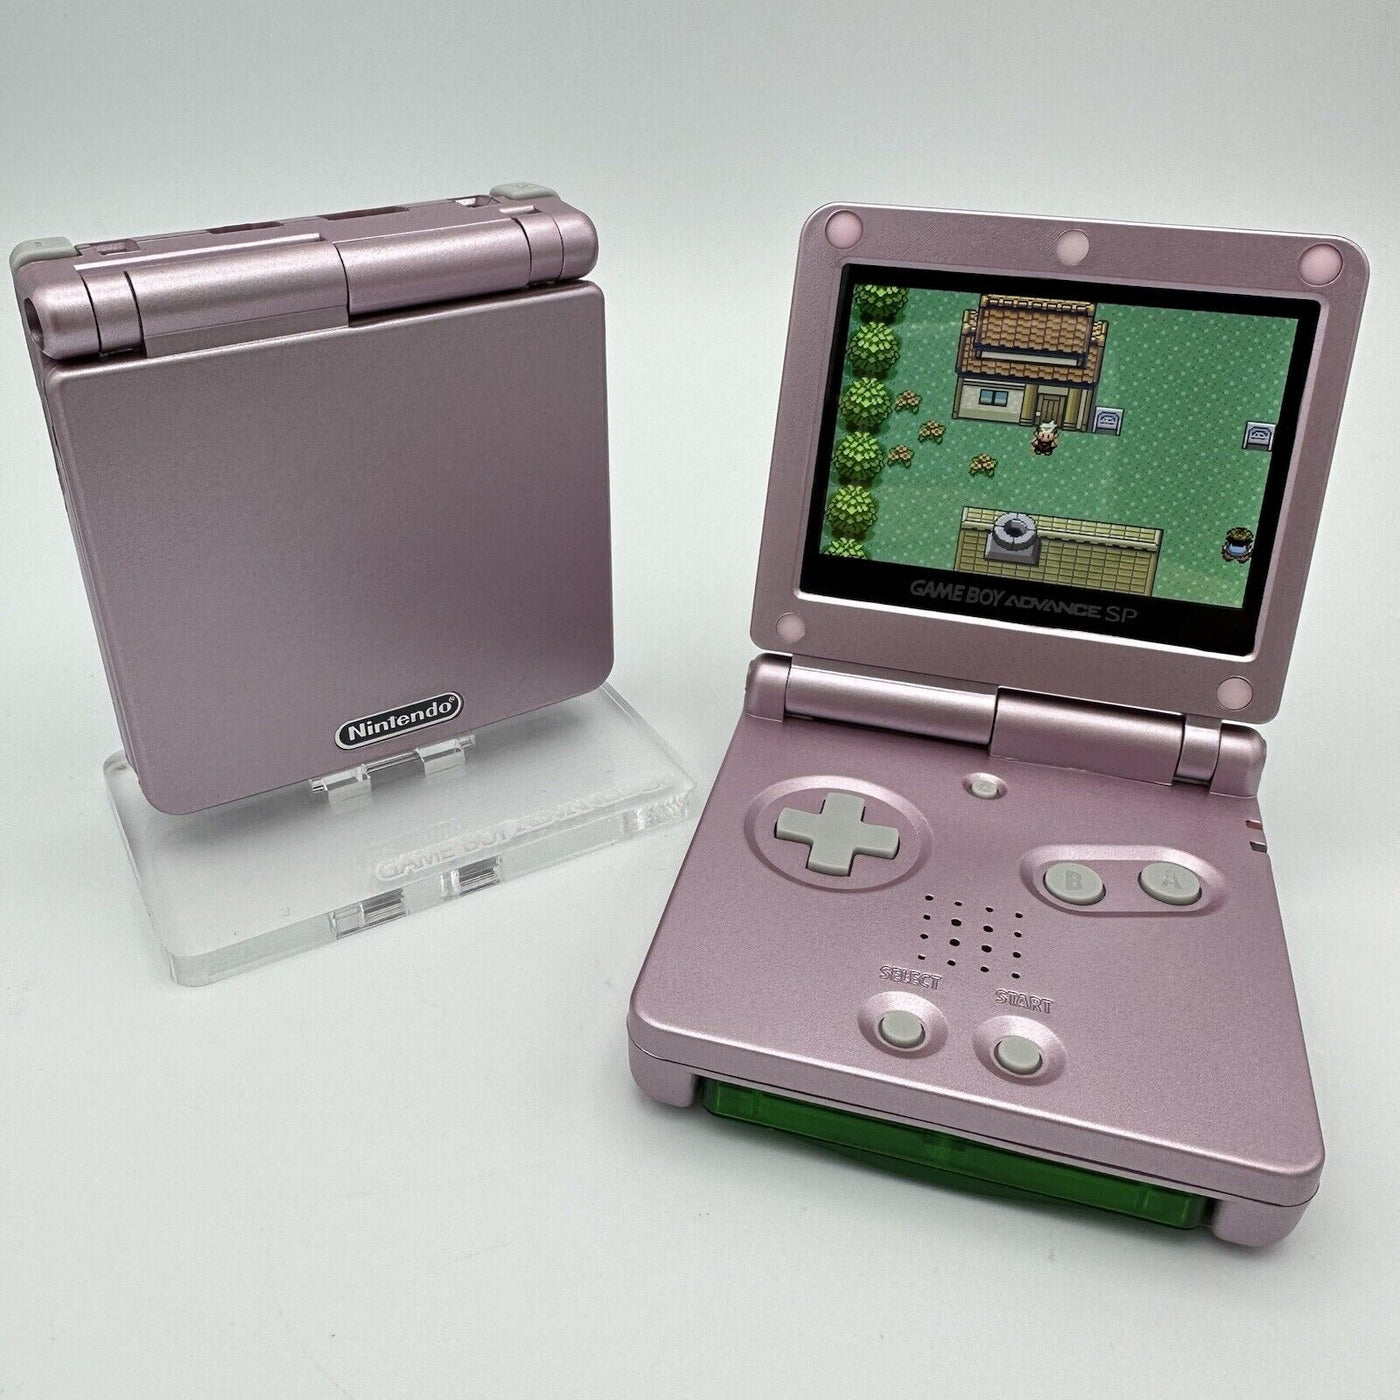 Game Boy Advance SP Console - Coral Pink